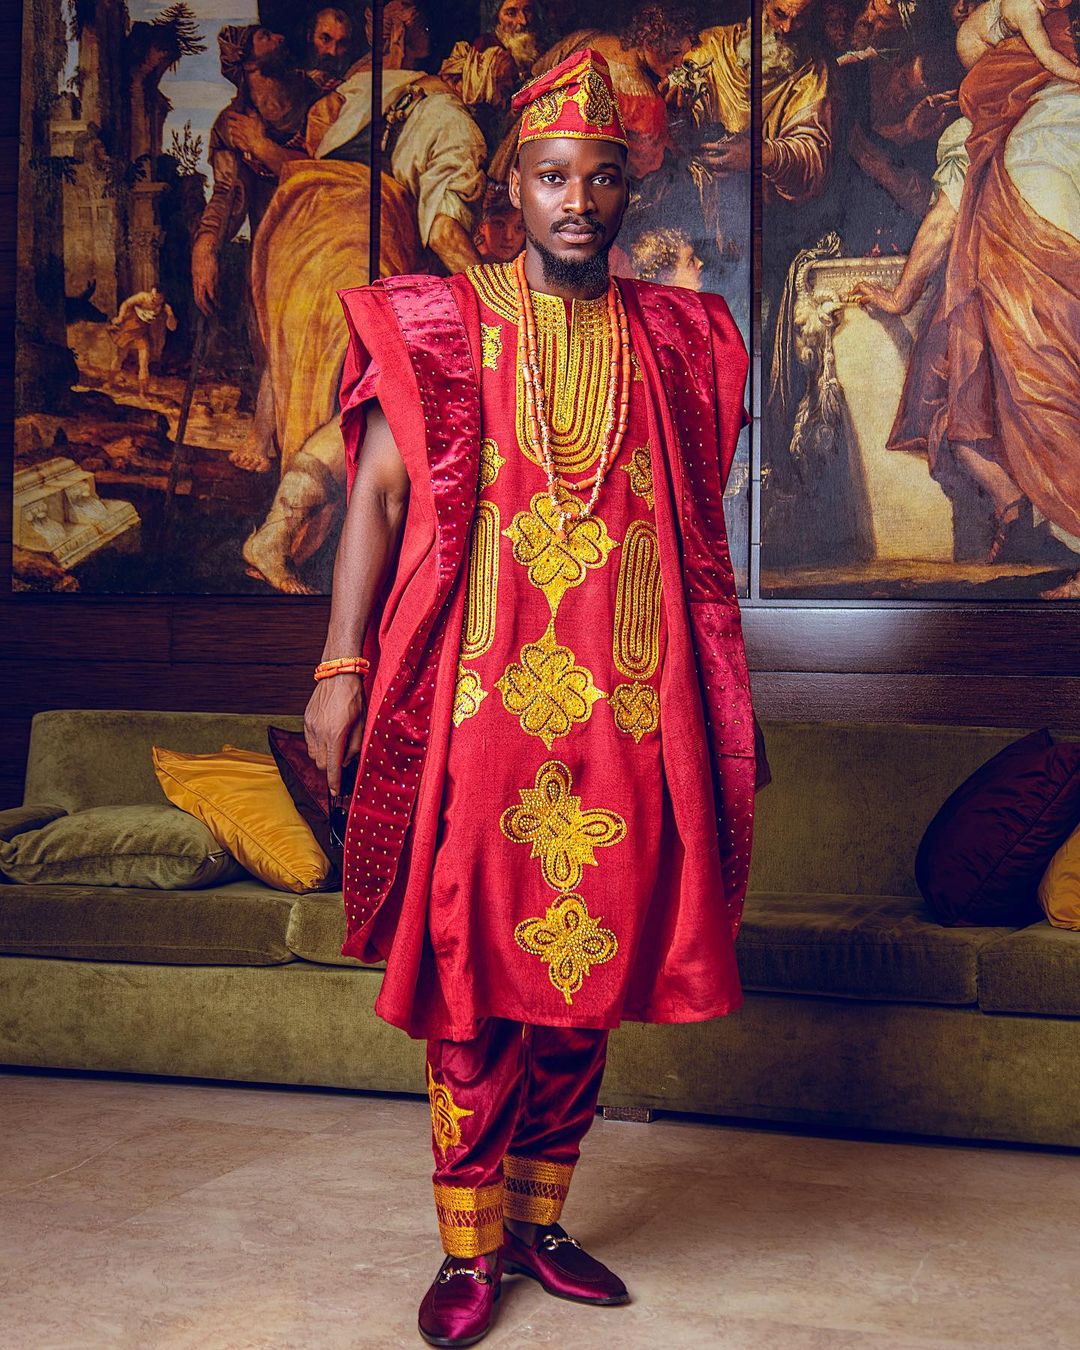 Tobi Bakre Is A Modern Man With Incredible Fashion And Endless Groom Style Inspiration